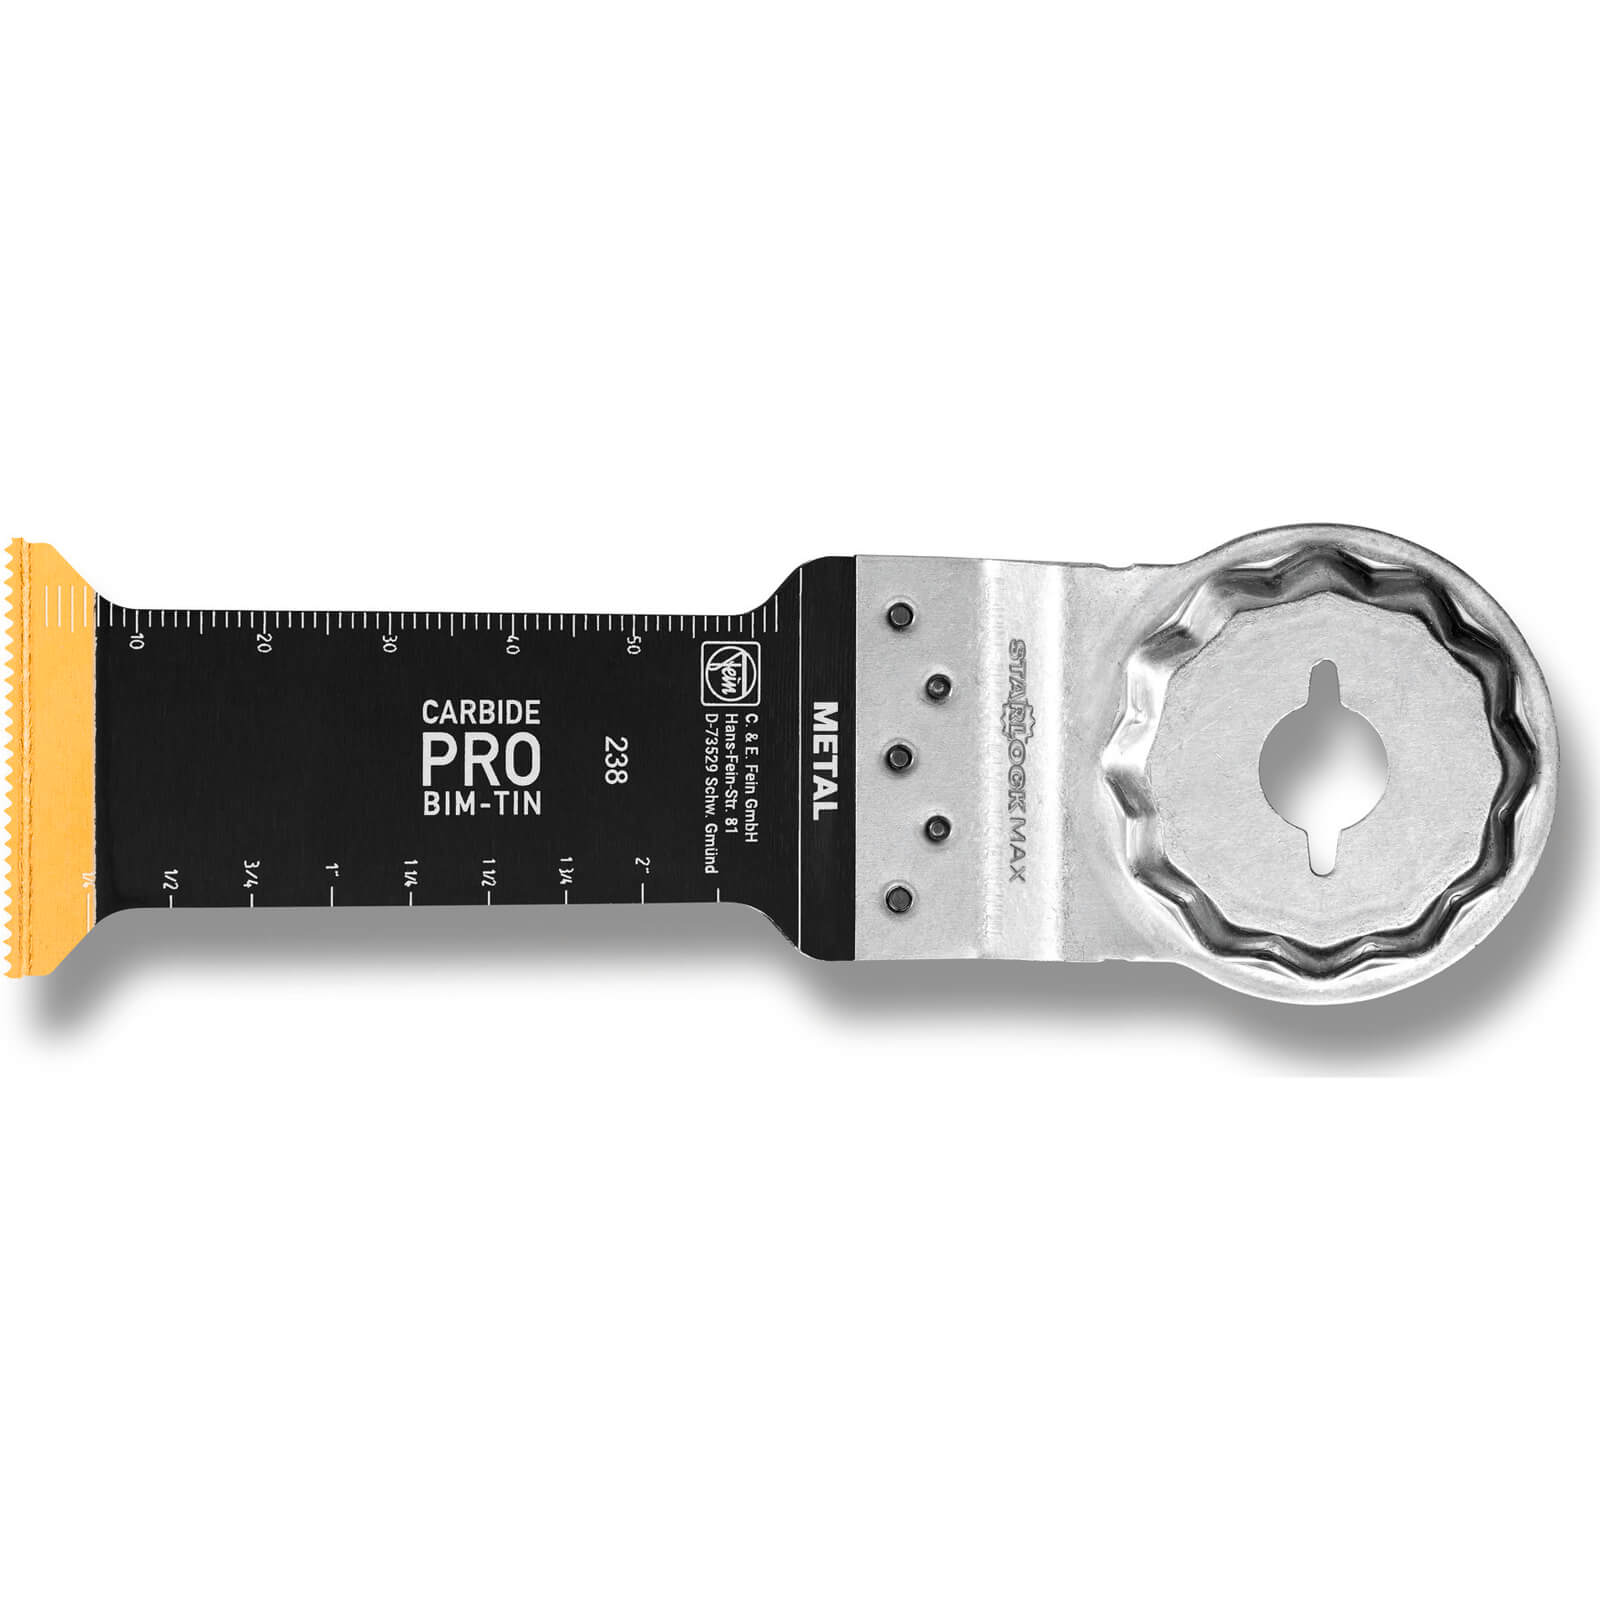 Image of Fein E-Cut Carbide Pro Starlock Max Oscillating Multi Tool Plunge Saw Blade 32mm Pack of 5